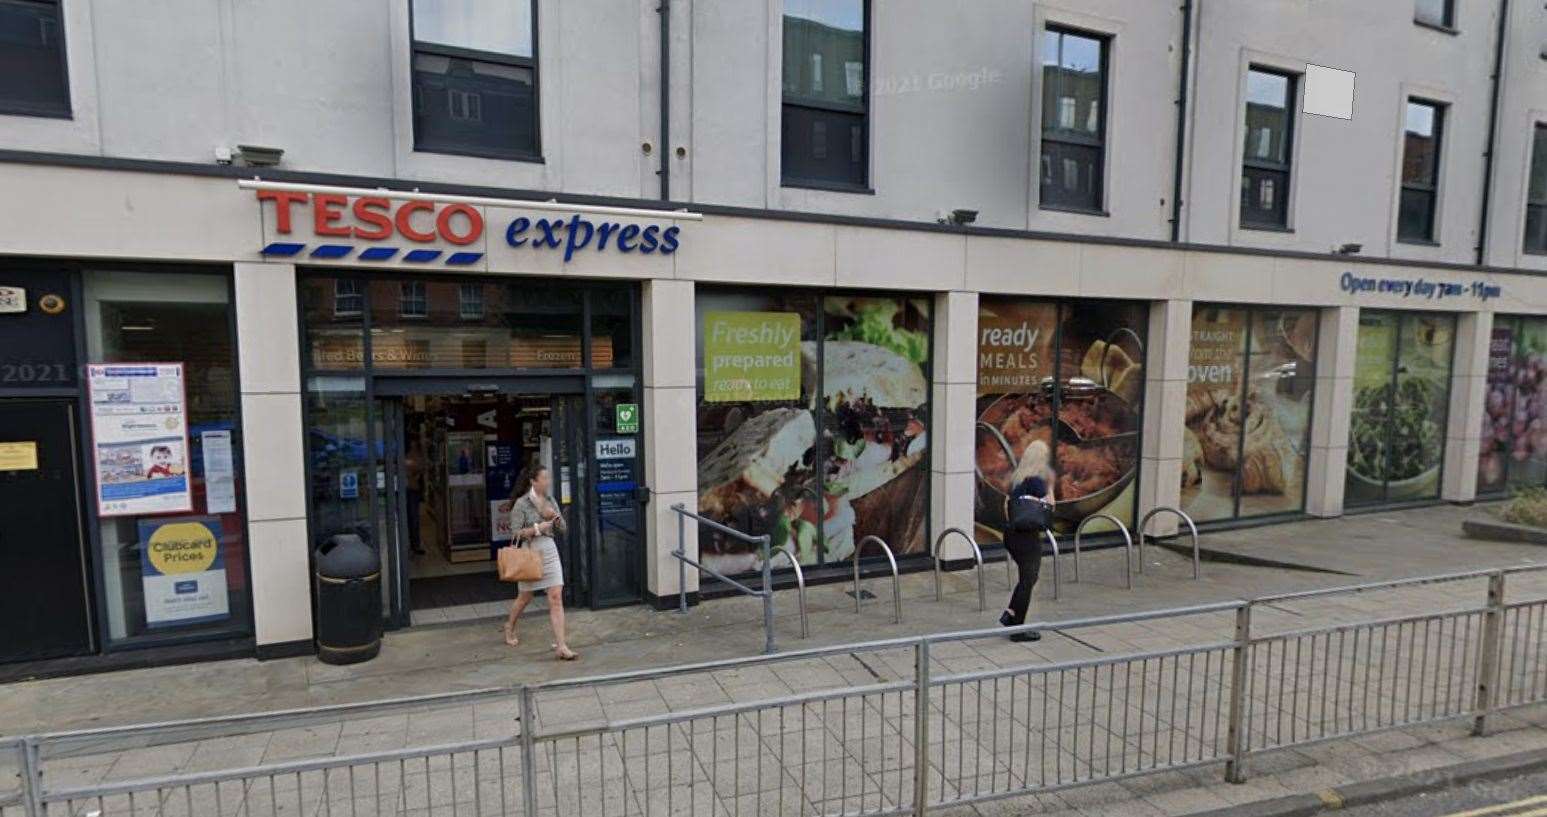 The thefts occurred at Tesco Express in New Dover Road. Picture: Google